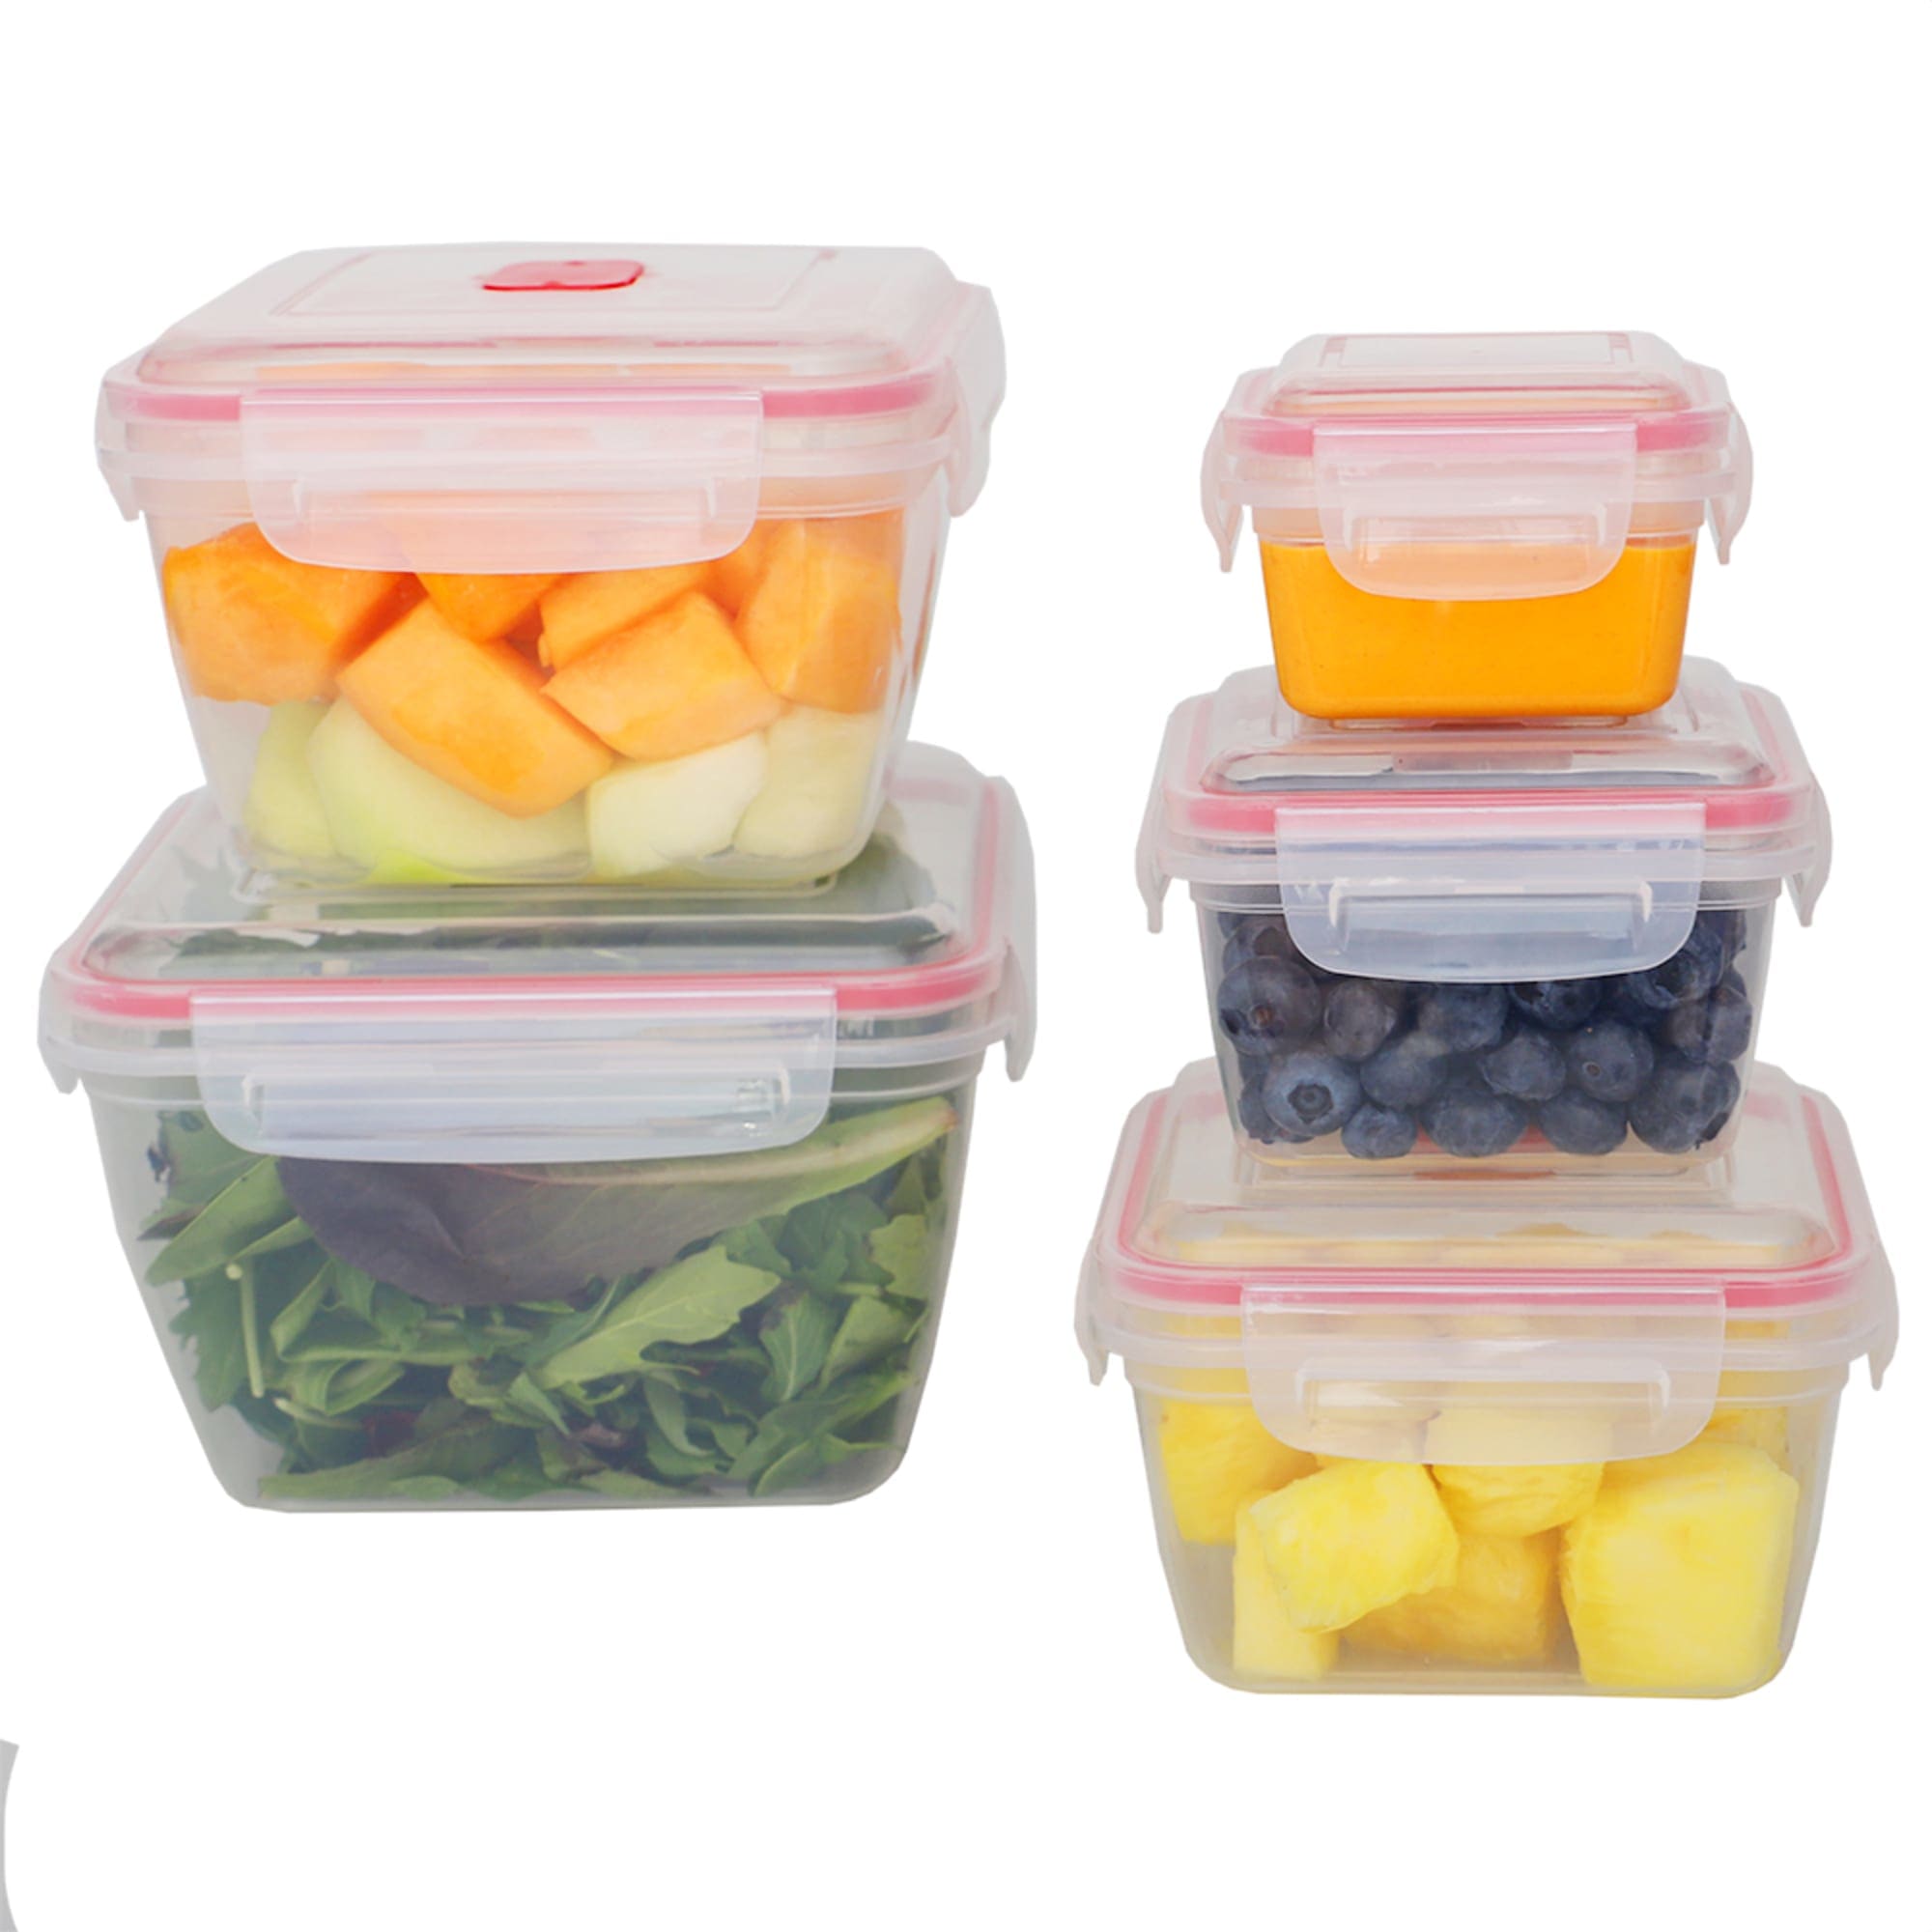 Home Basics 10 Piece Locking Square Plastic Food Storage Containers with Ventilated Snap-On Lids, Red $8.00 EACH, CASE PACK OF 12